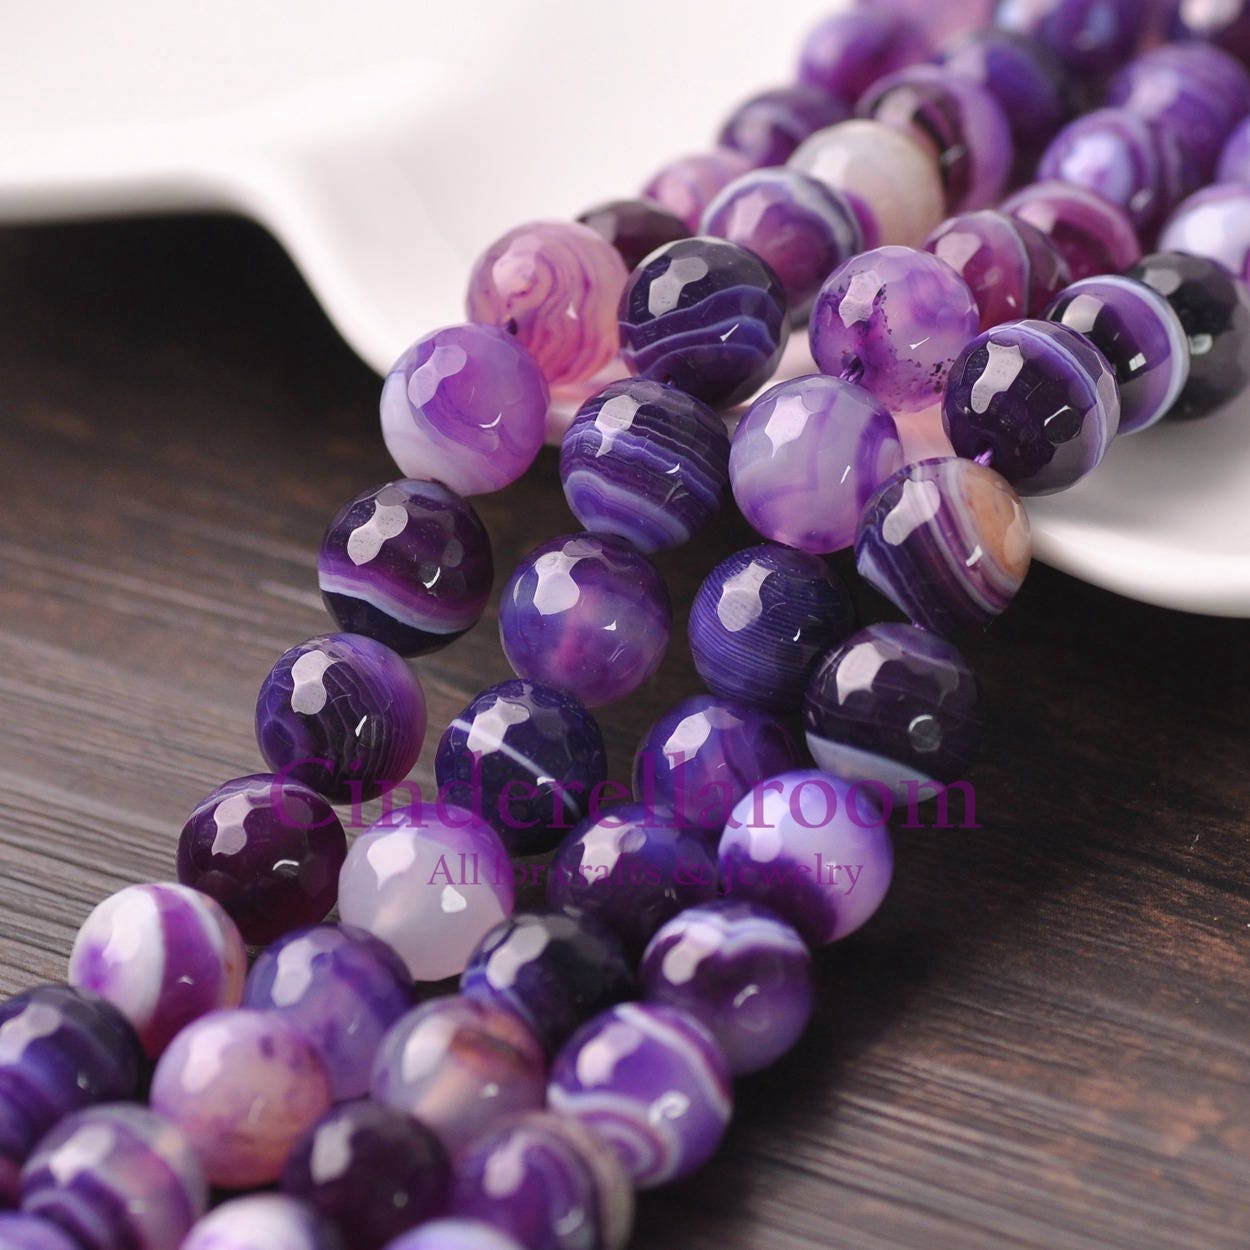 Wholesale Lot Natural Gemstone Round Spacer Loose Beads 4mm 6mm 8mm 10mm 12mm 